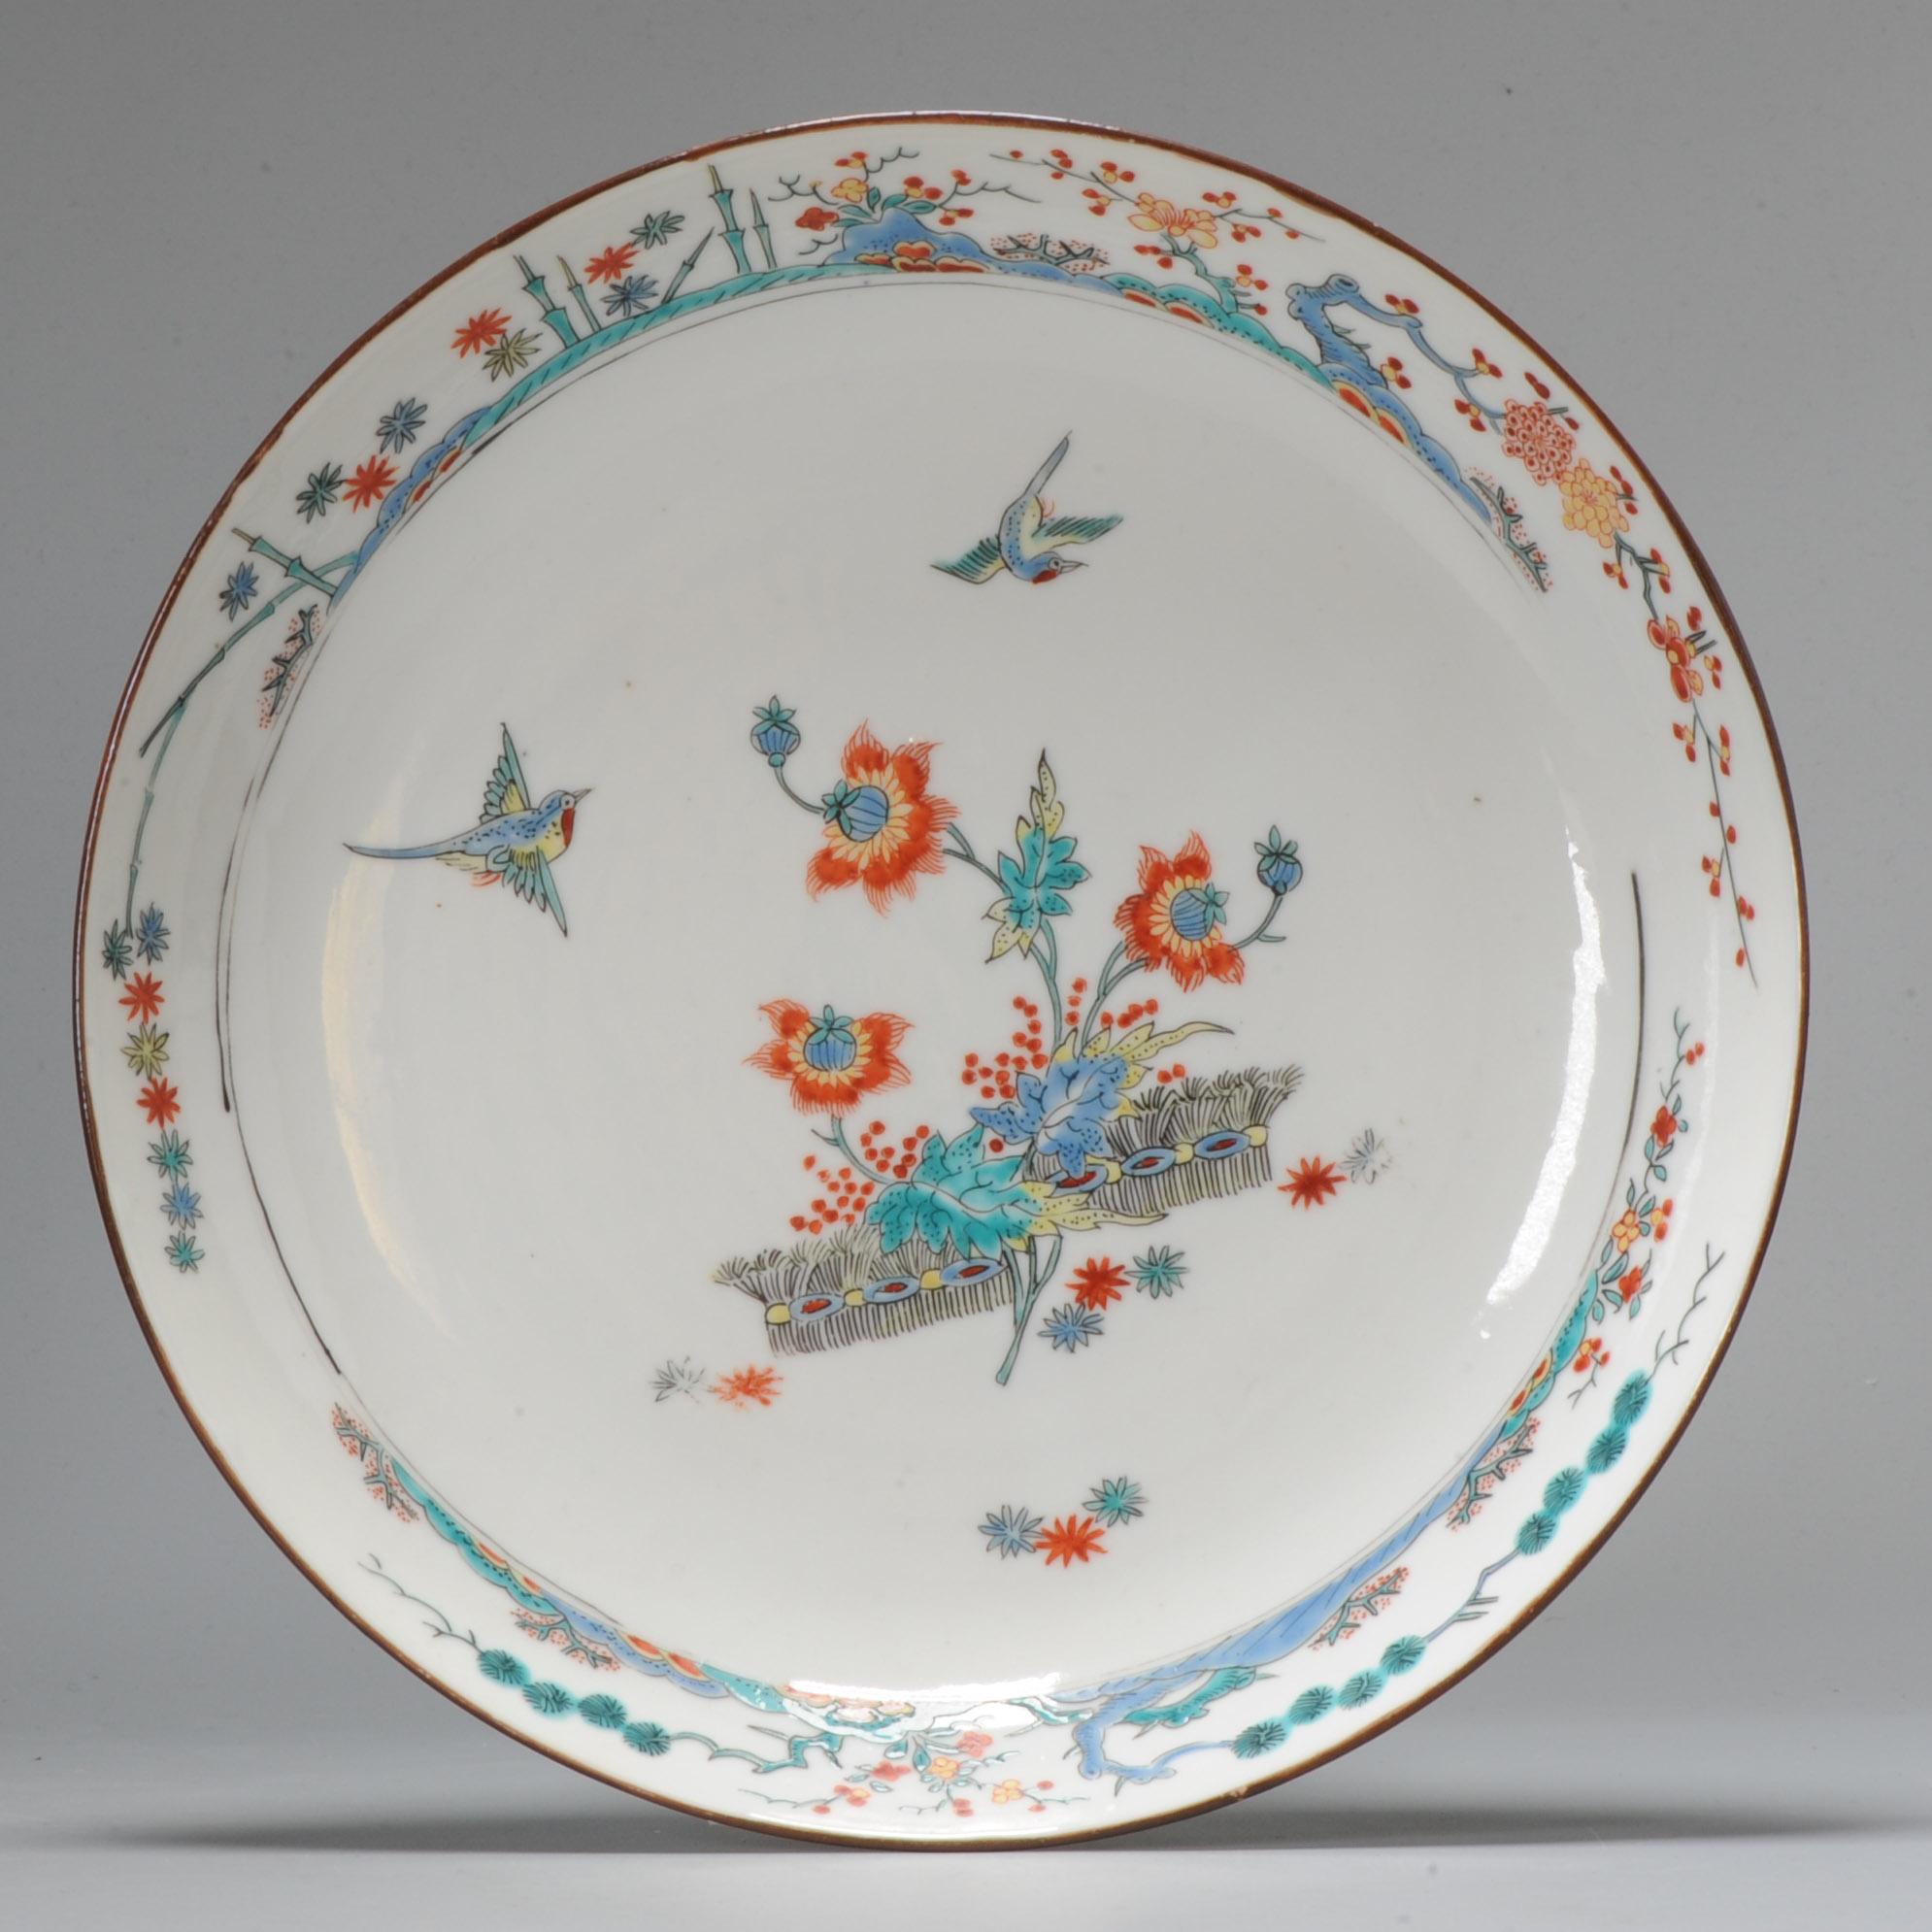 1027 Top Quality Kakiemon Plate. Painted in Holland on a Chinese porcelain plate